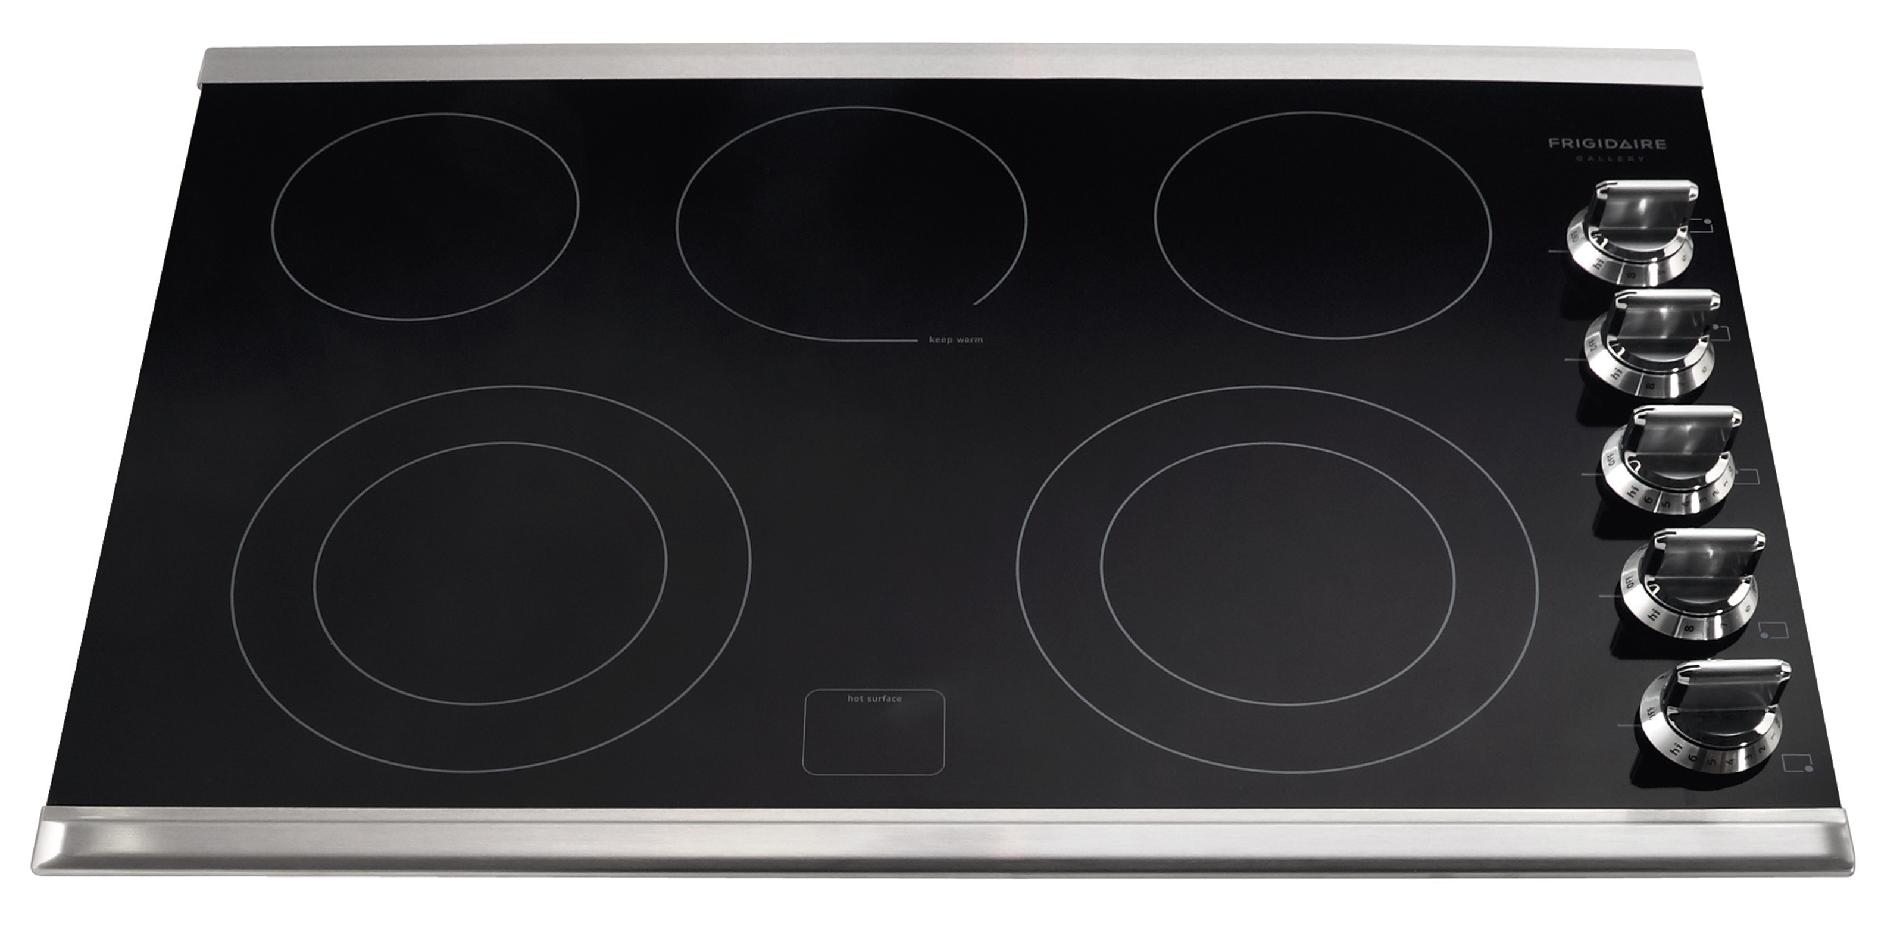 FGEC3067MS Gallery 30 Electric Cooktop - Stainless Steel